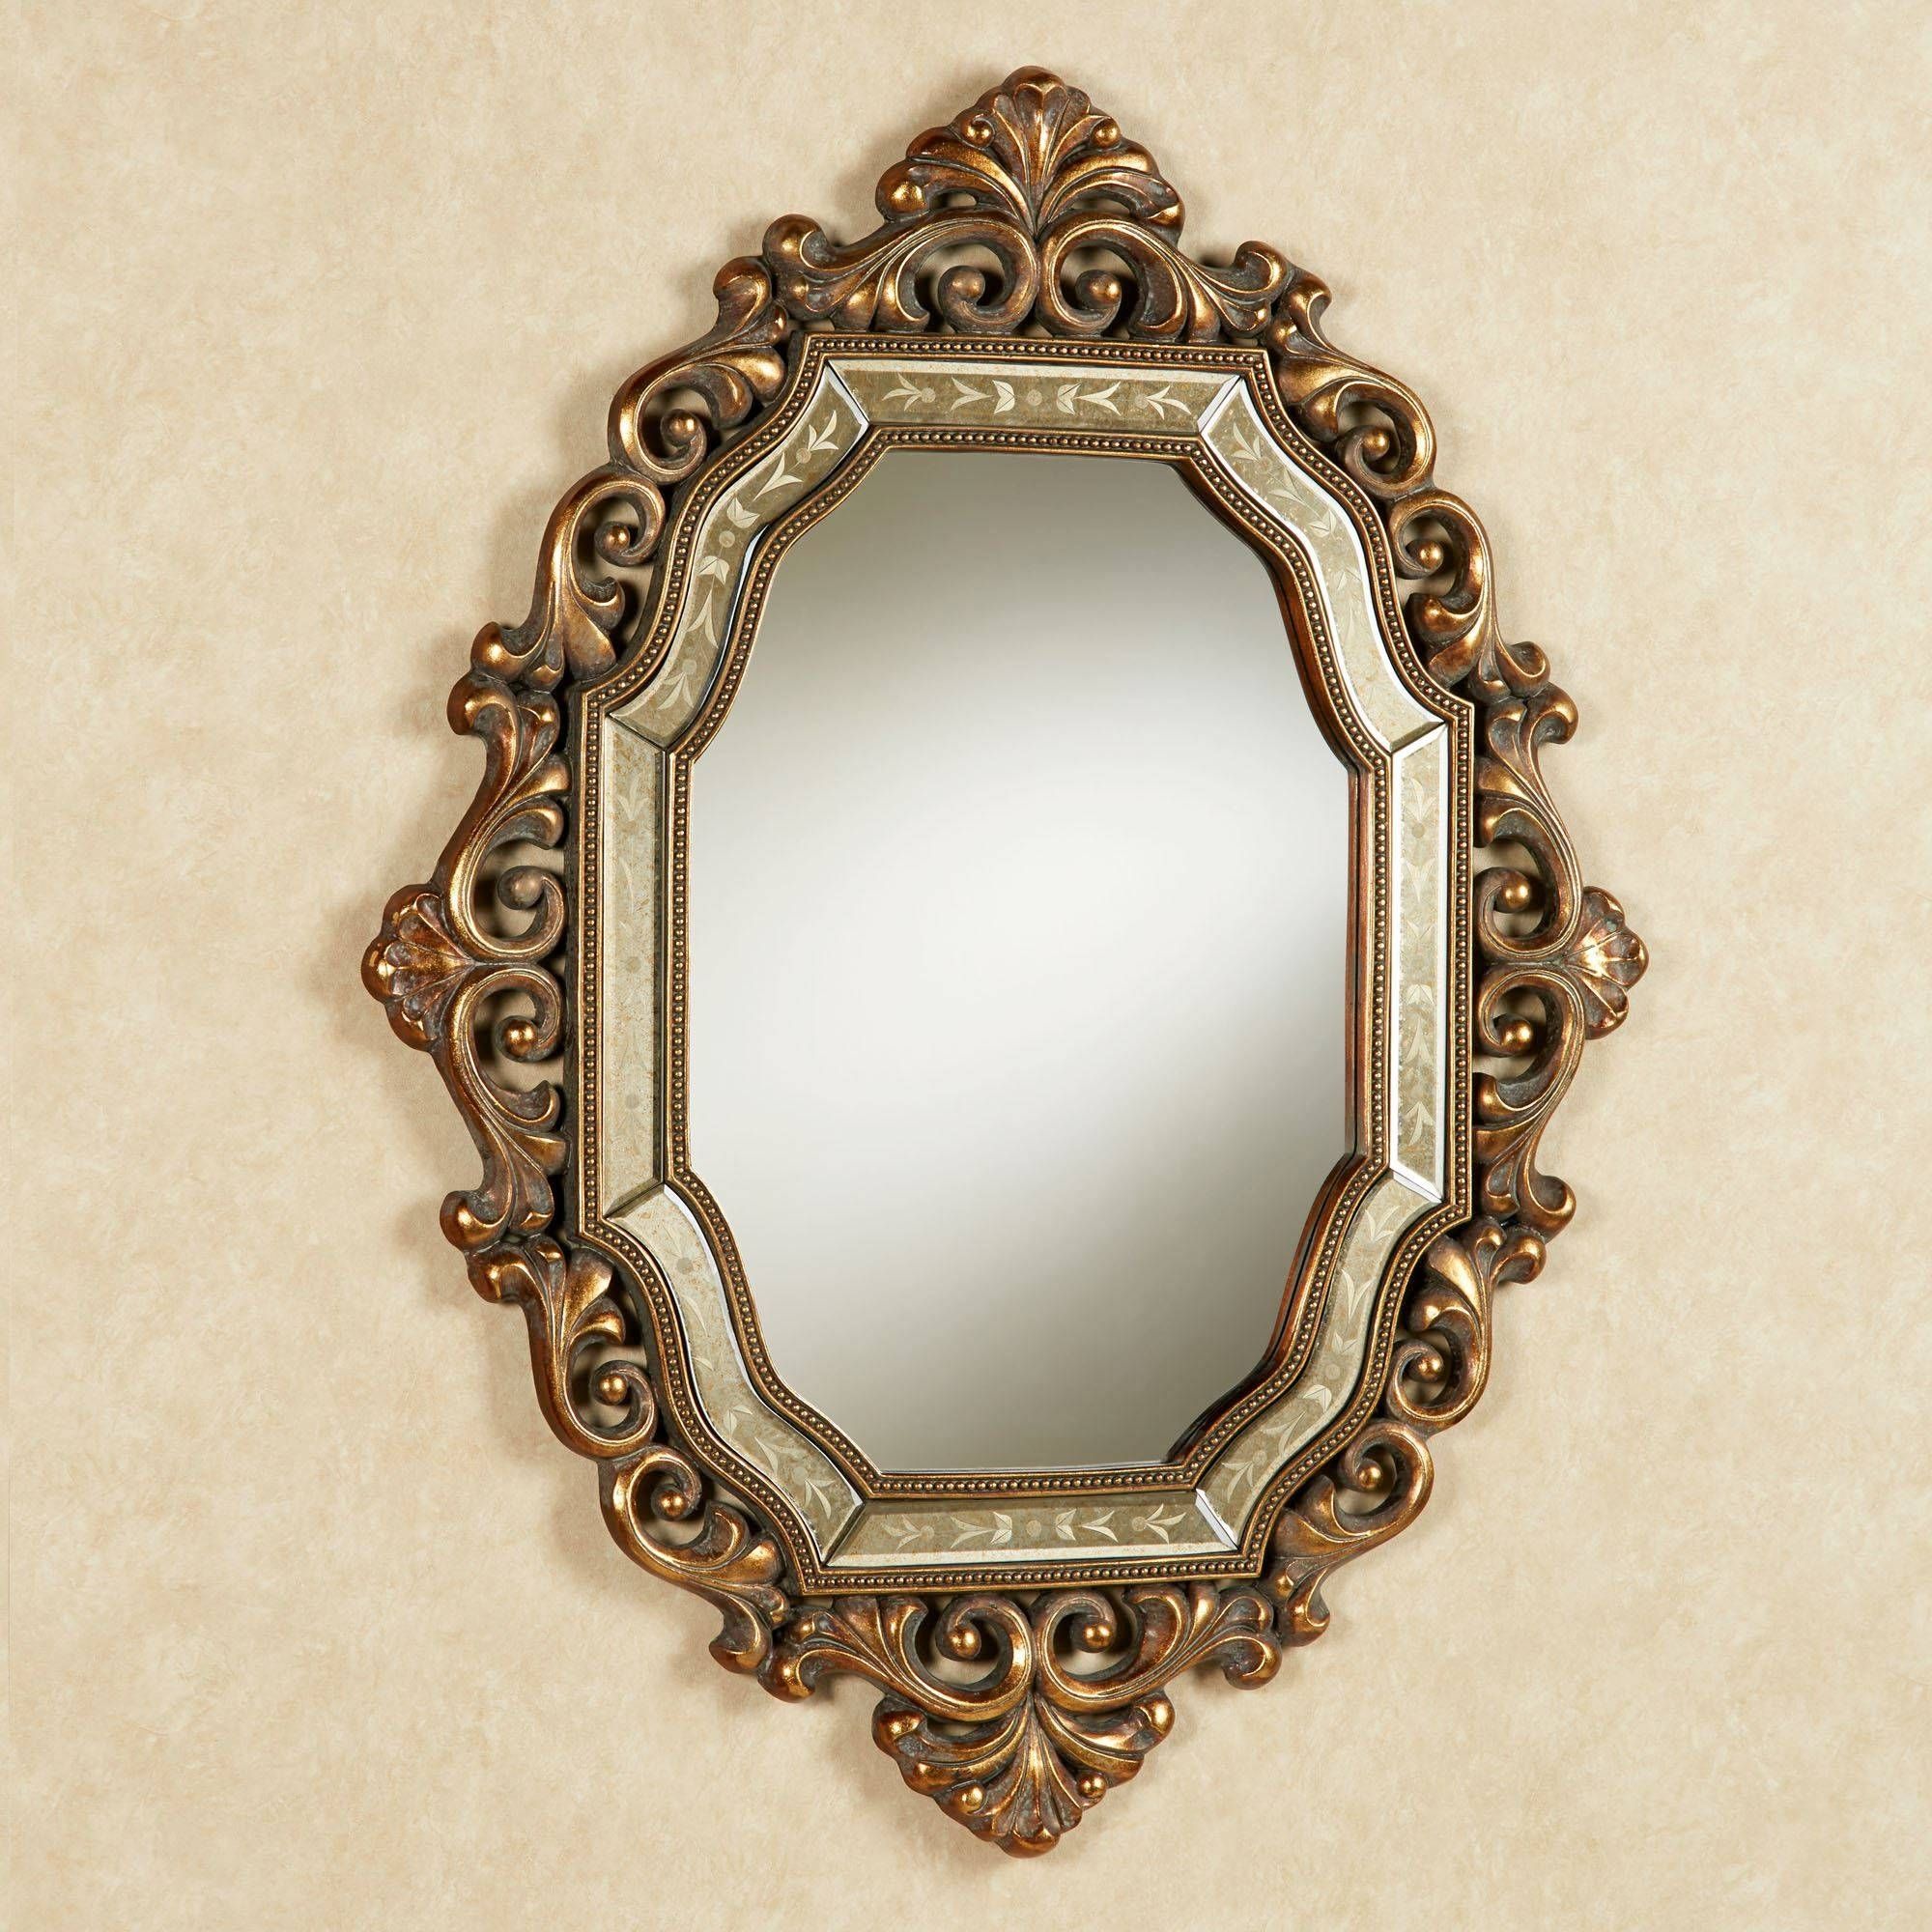 Verena Old World Wall Mirror Inside Vintage Gold Mirrors (View 8 of 15)